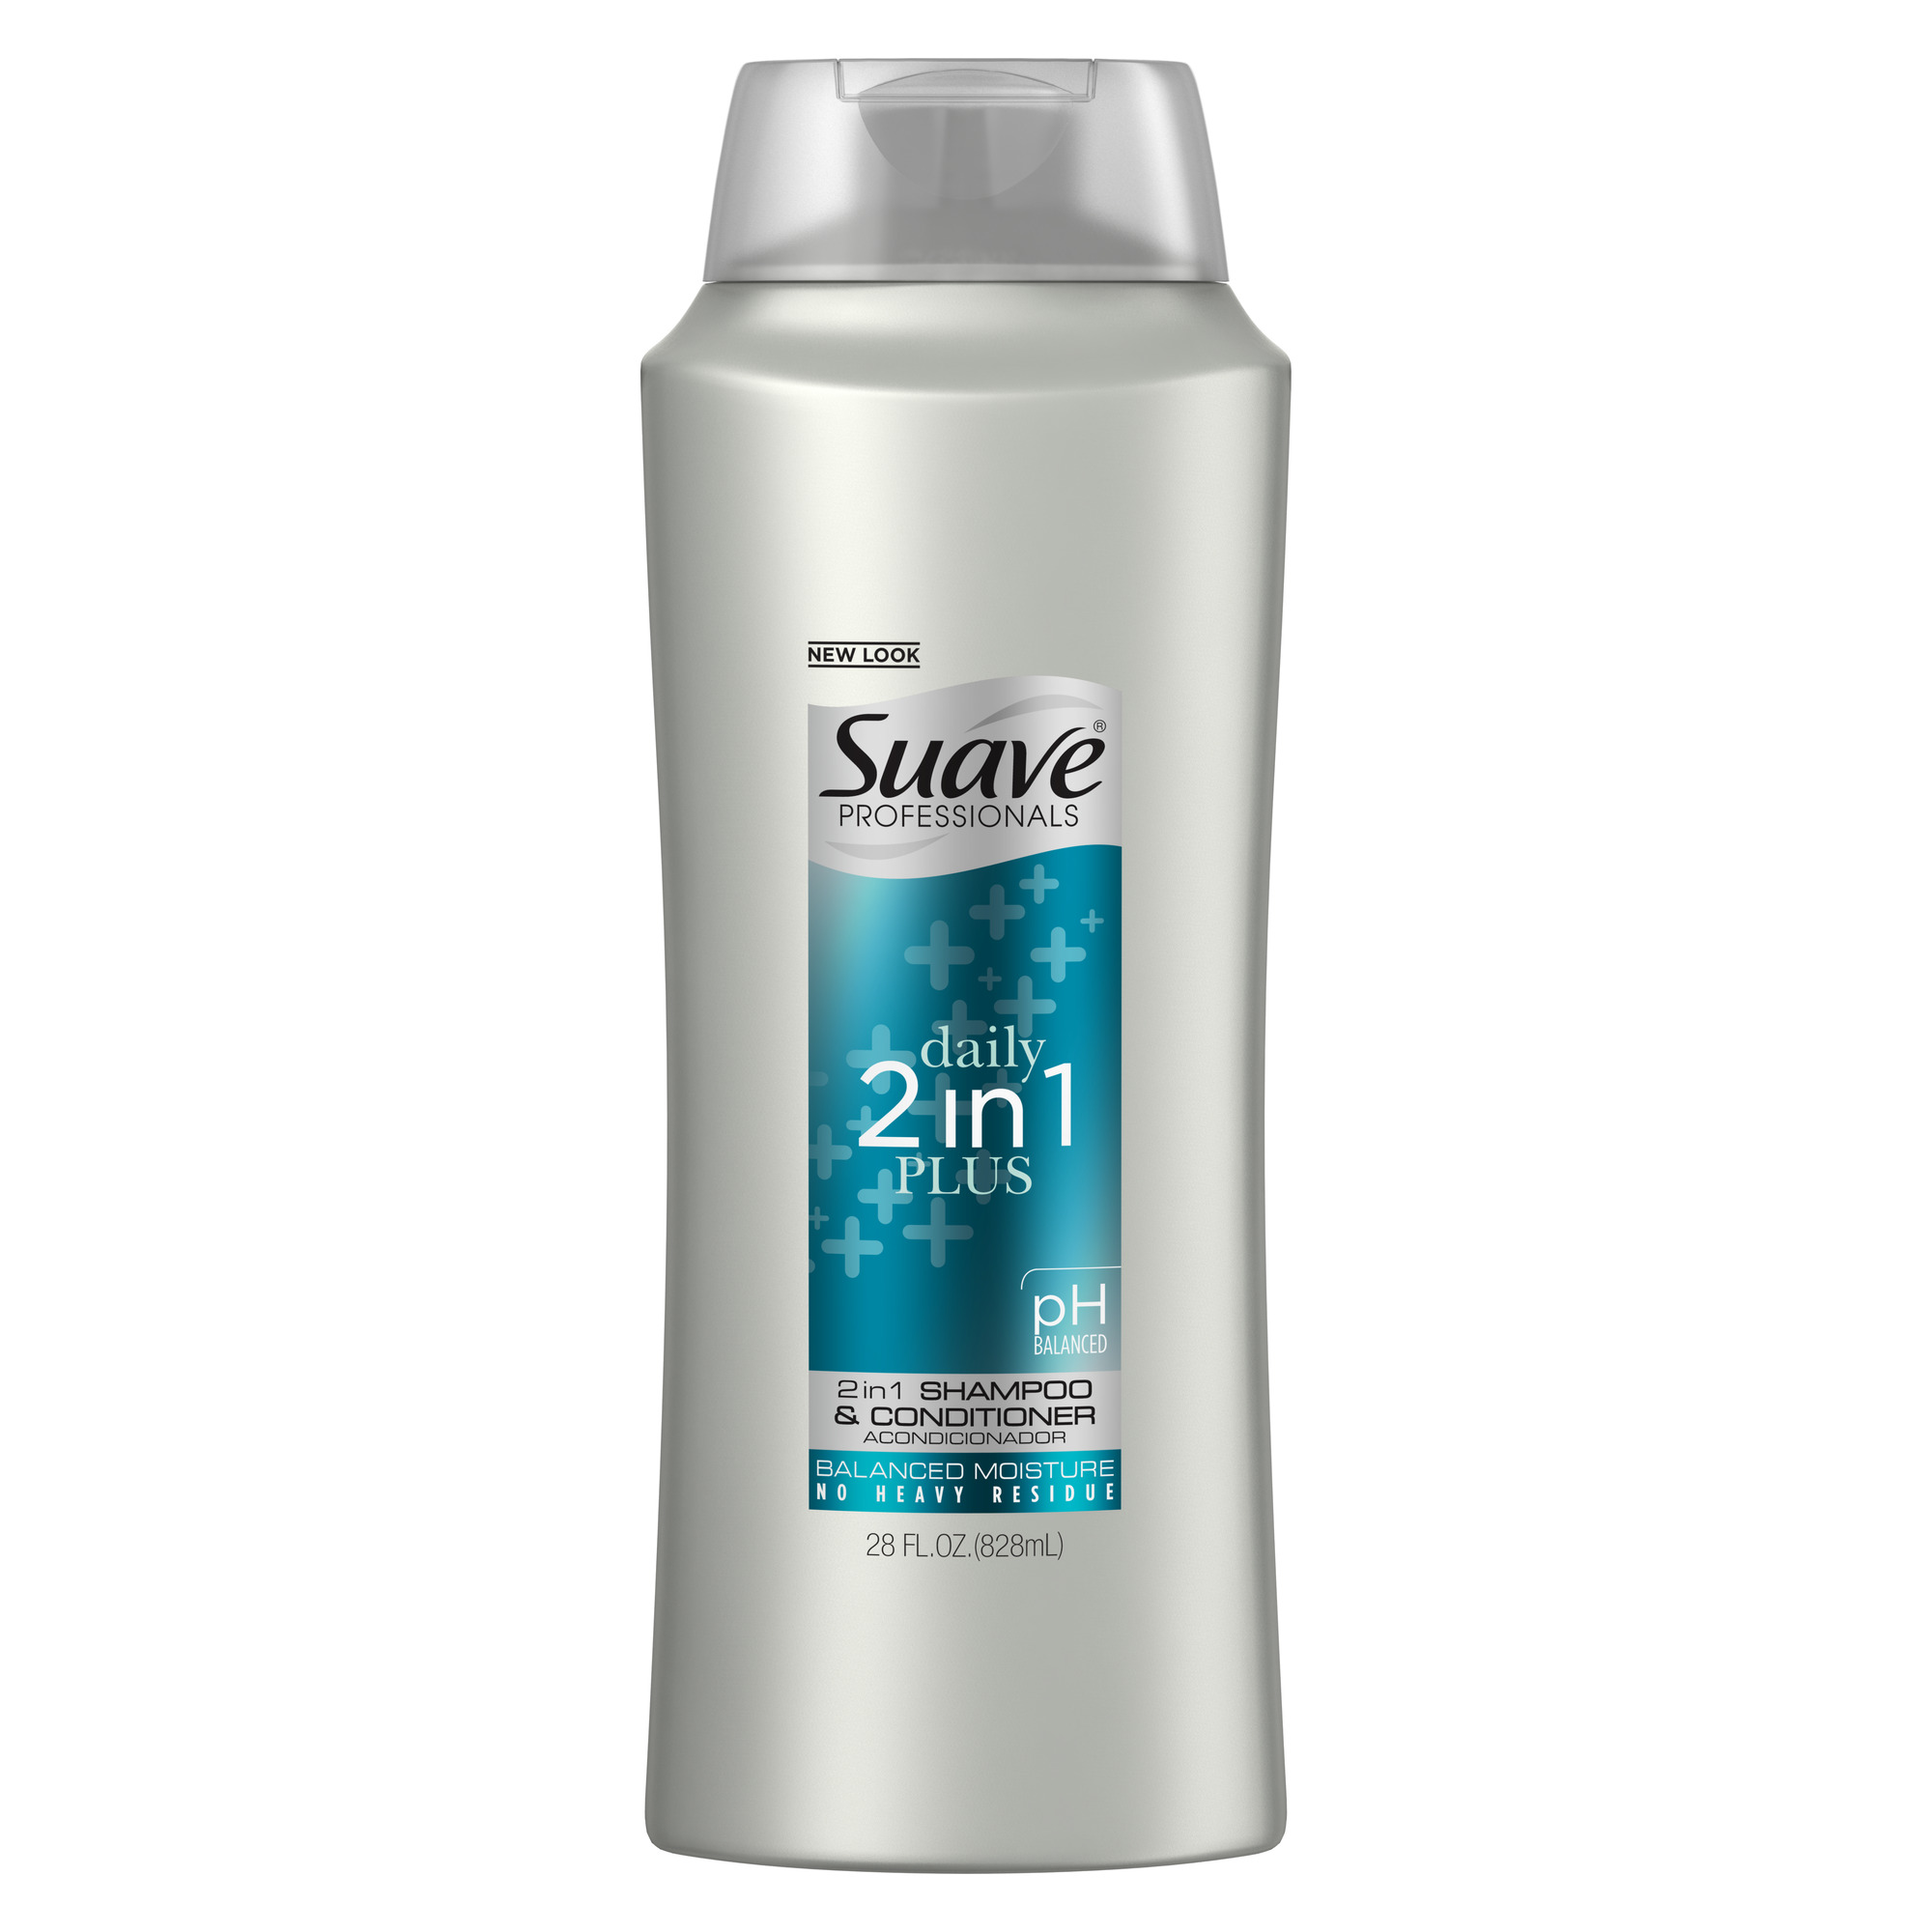 Suave Professionals Clarifying Moisturizing Daily Plus 2 in 1 Shampoo and Conditioner, 28 fl oz - image 1 of 10